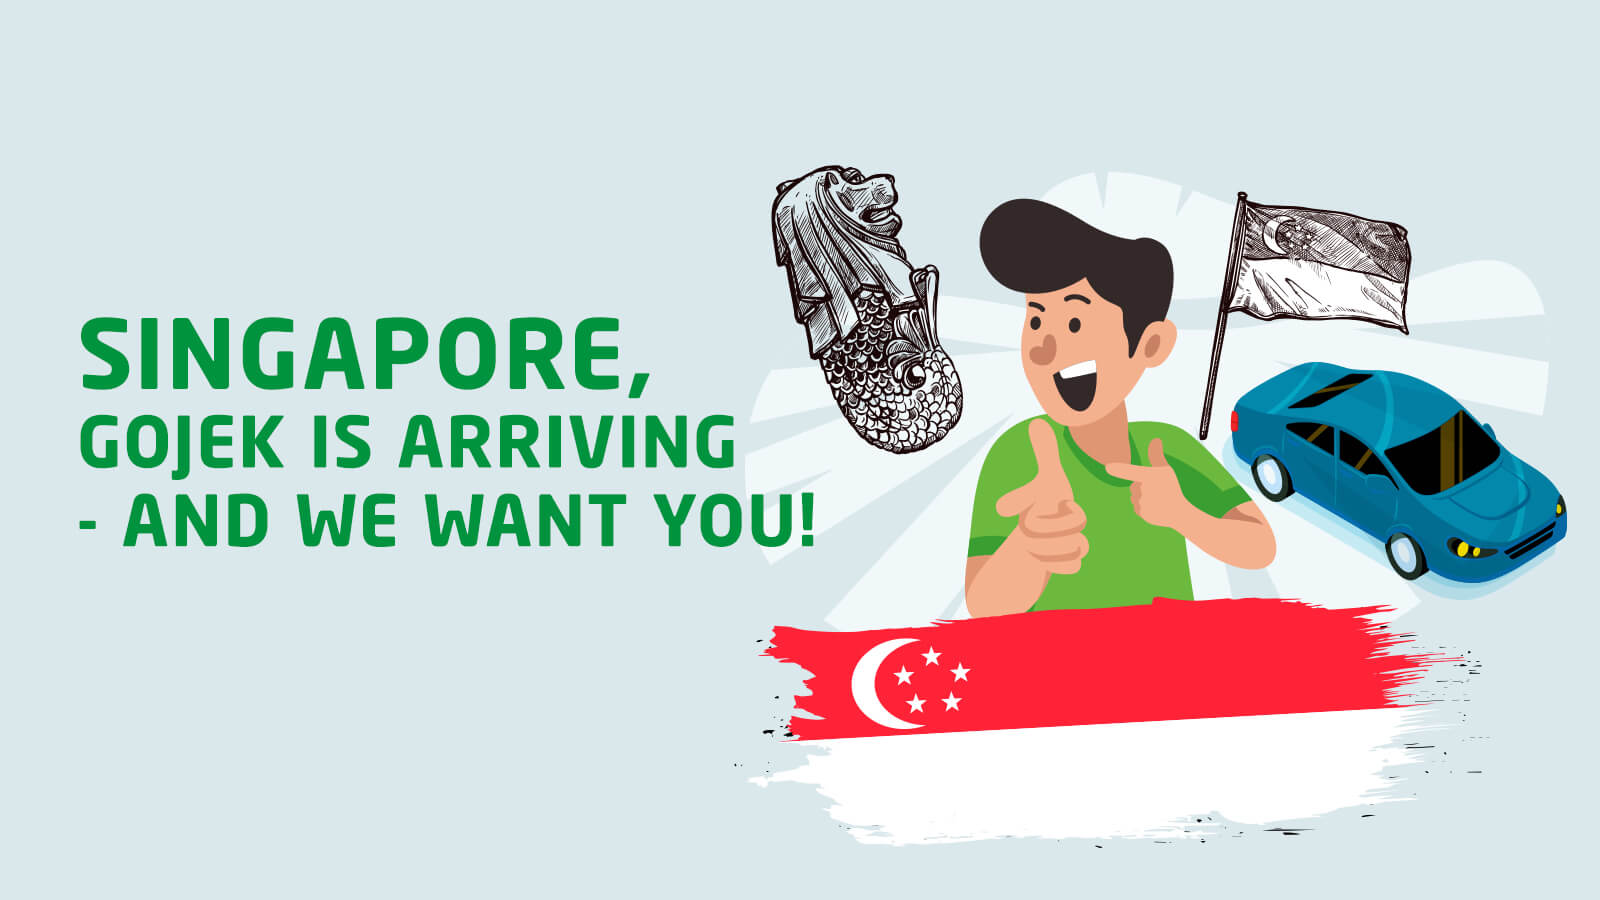 Pre-registration for drivers in Singapore commences